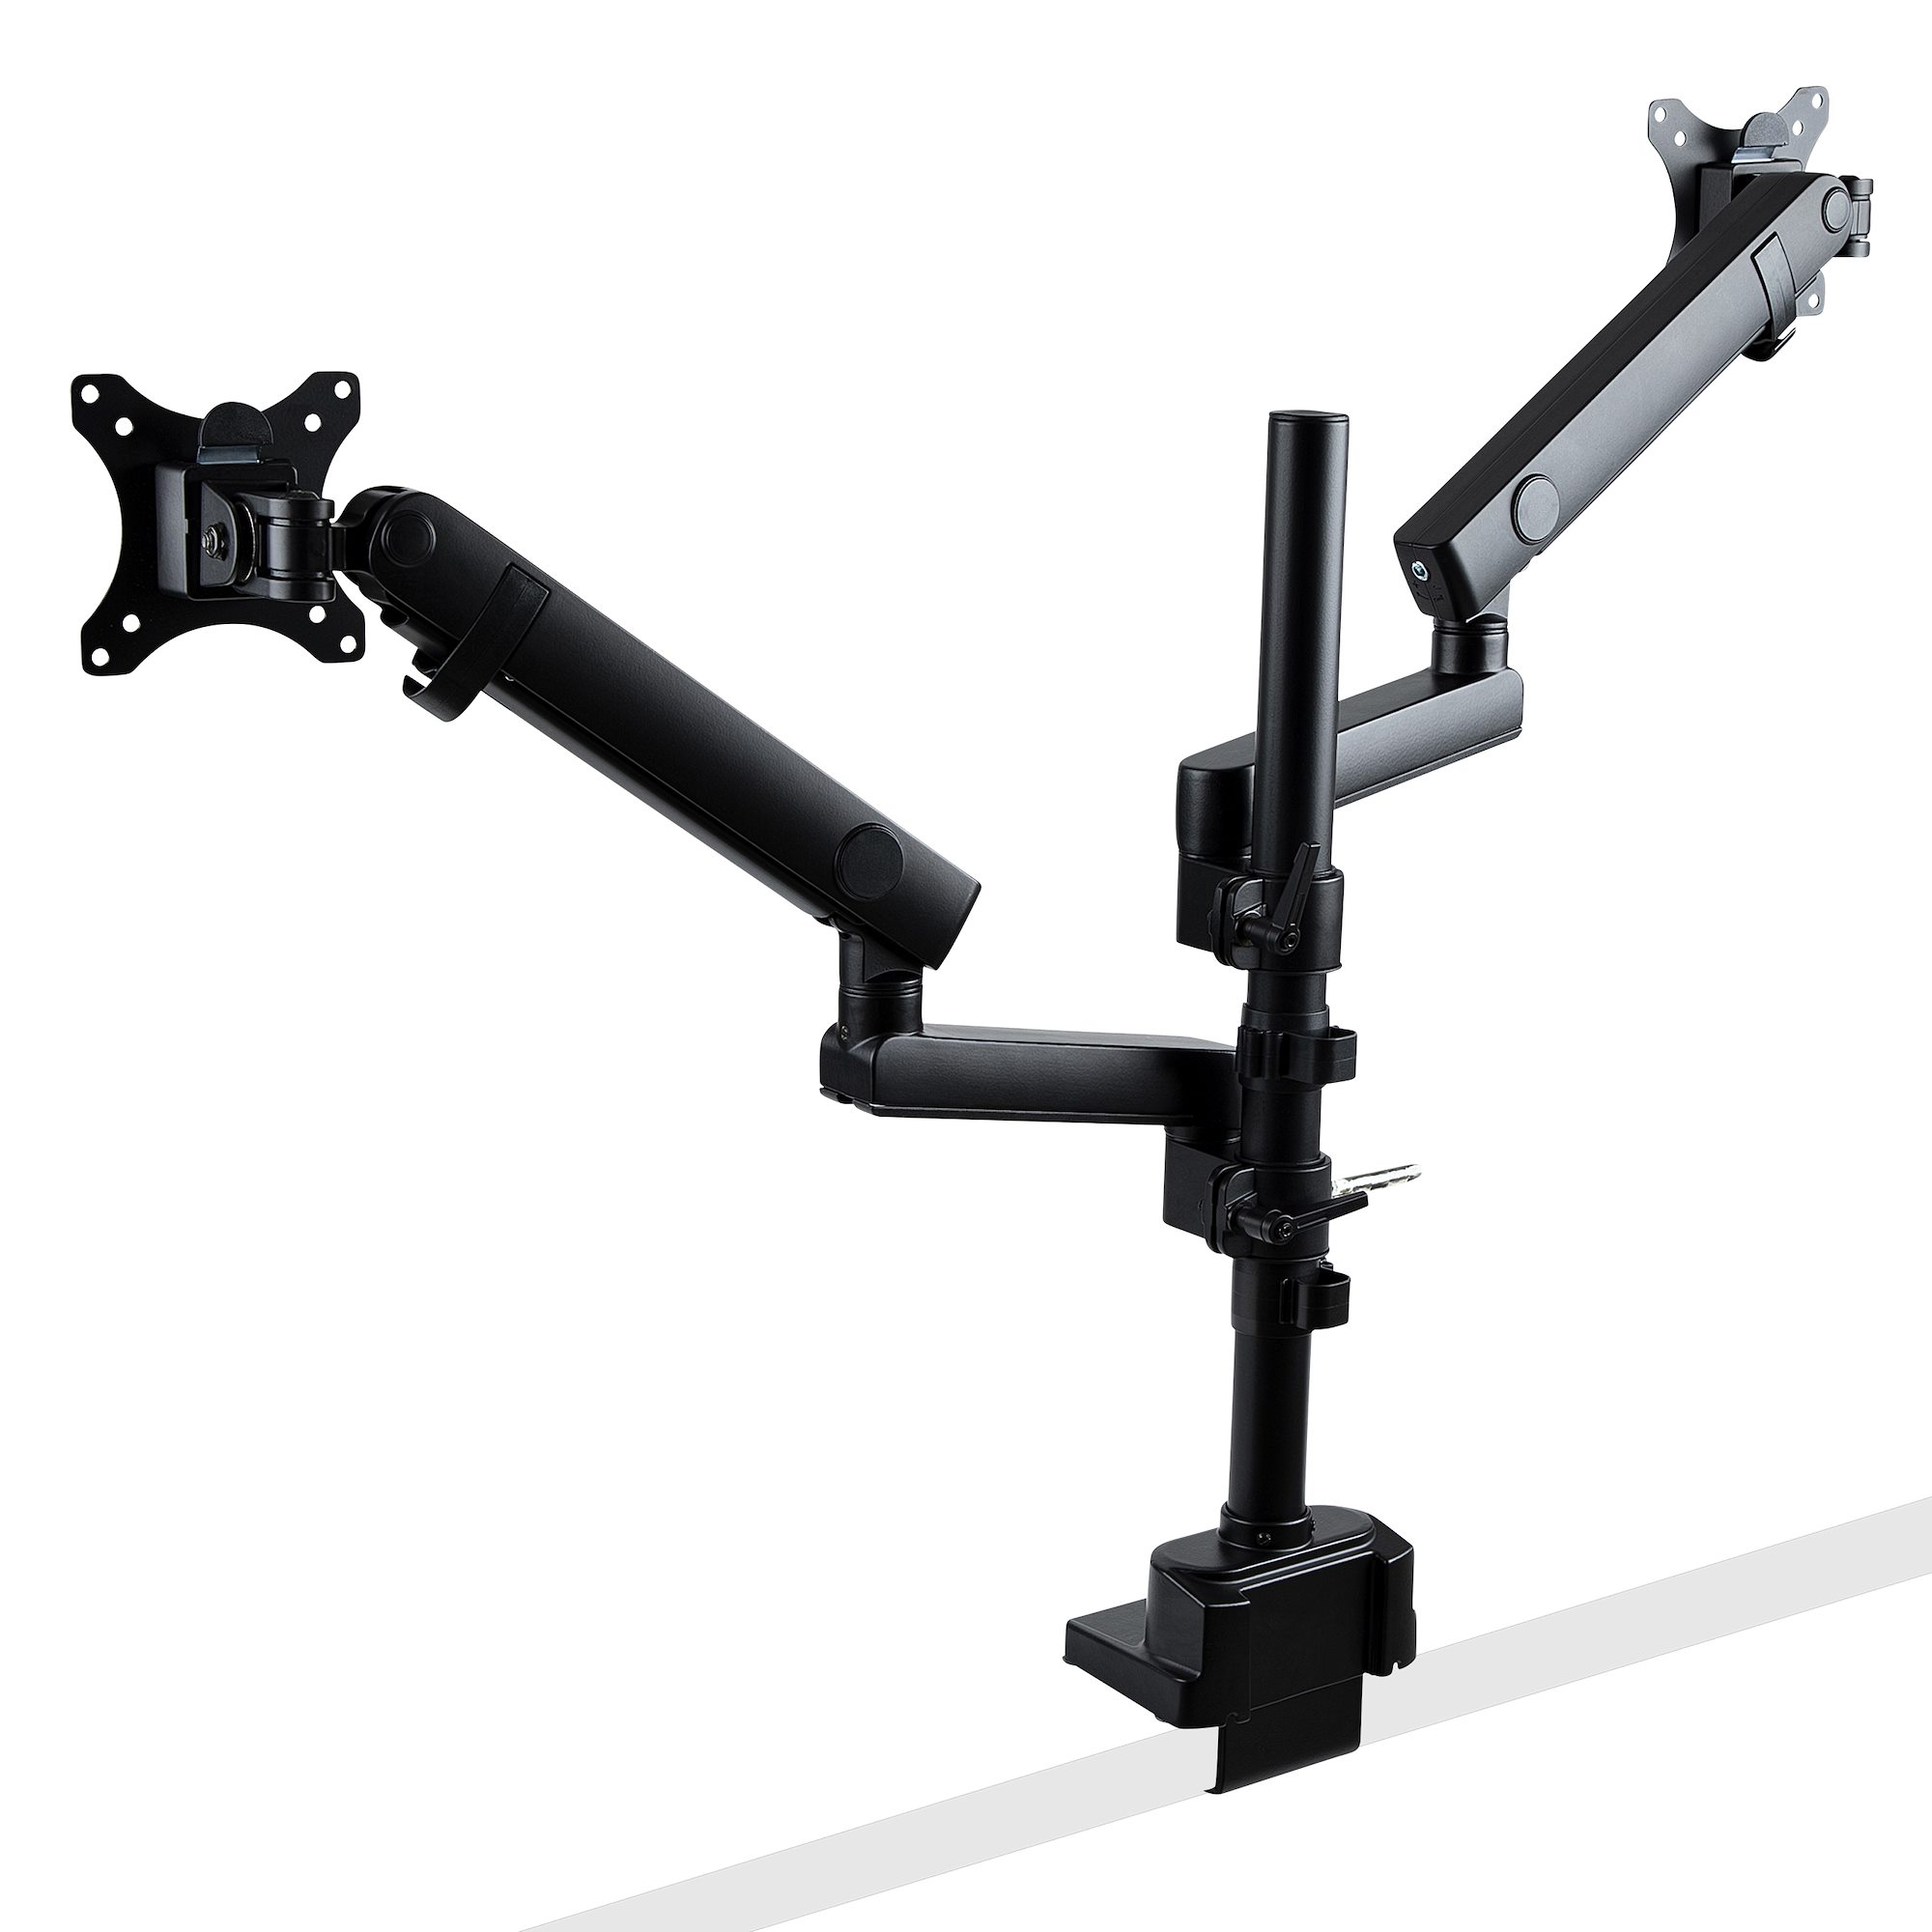 Shop  StarTech.com Desk Mount Dual Monitor Arm - Dual Articulating Monitor  Arm - Height Adjustable Mount - For Monitors up to 24 (29.9lb/13.6kg)